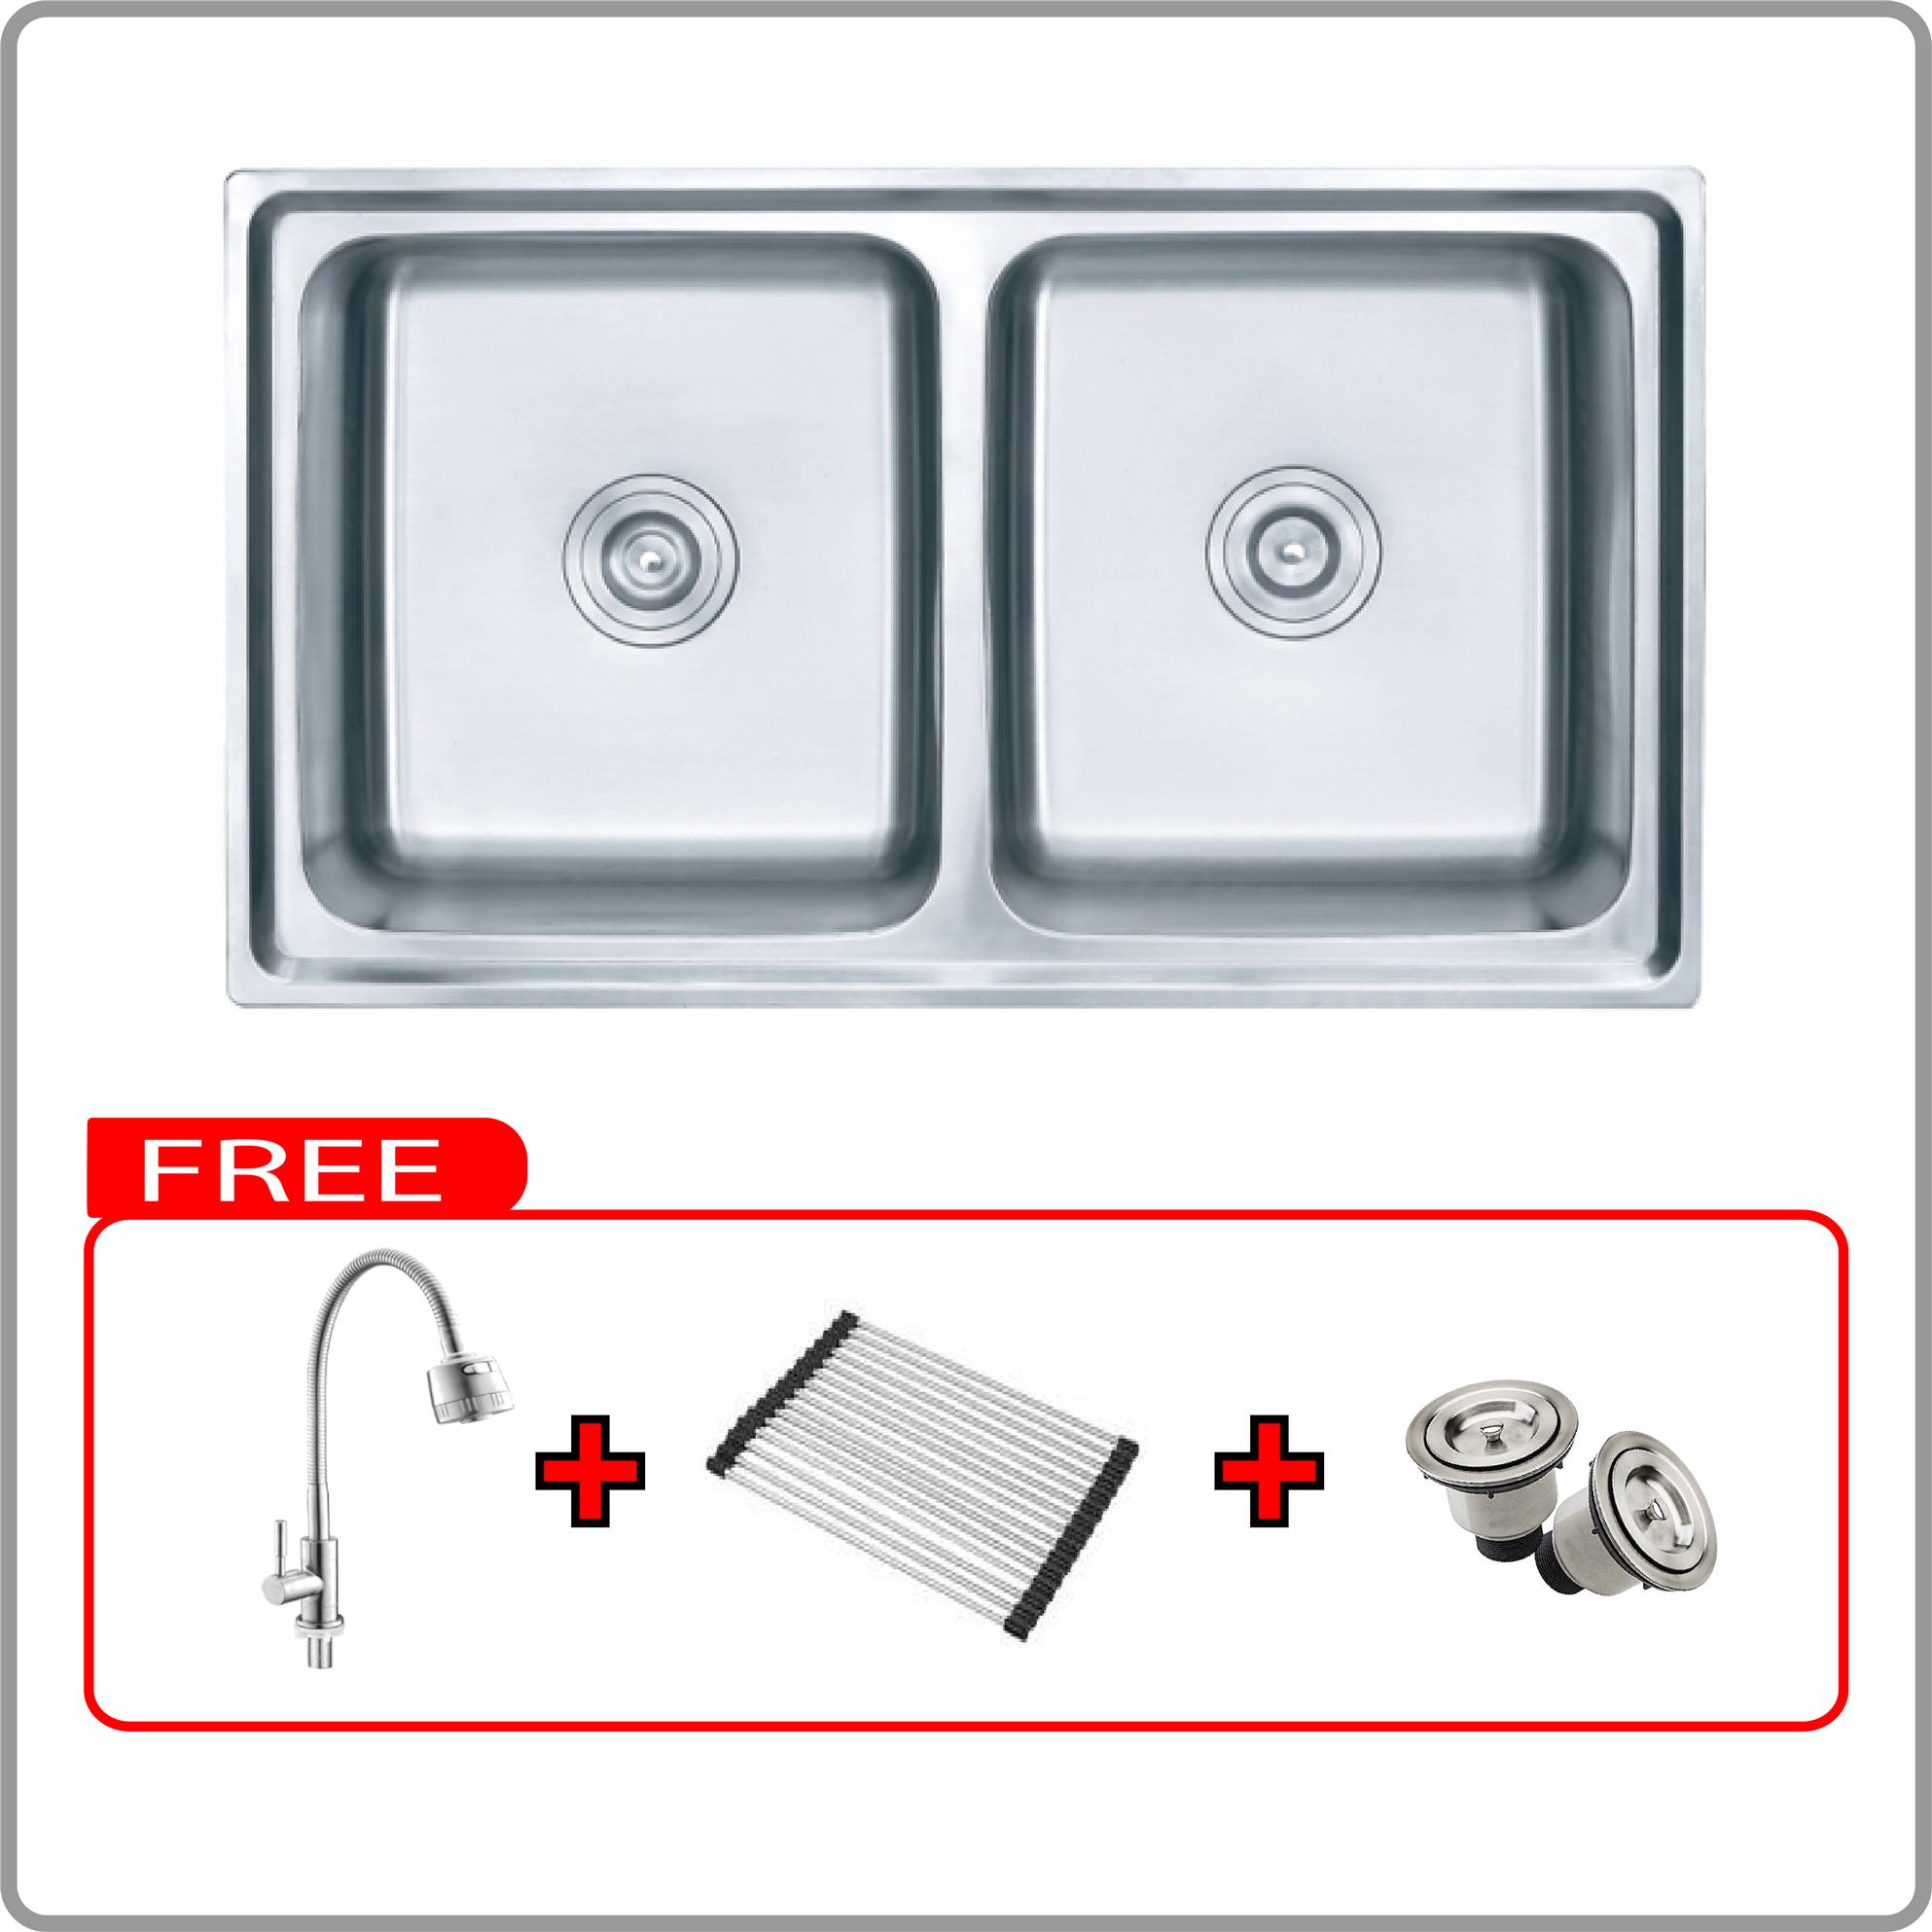 Latina High Quality Stainless Steel Double Bowl Kitchen Sink